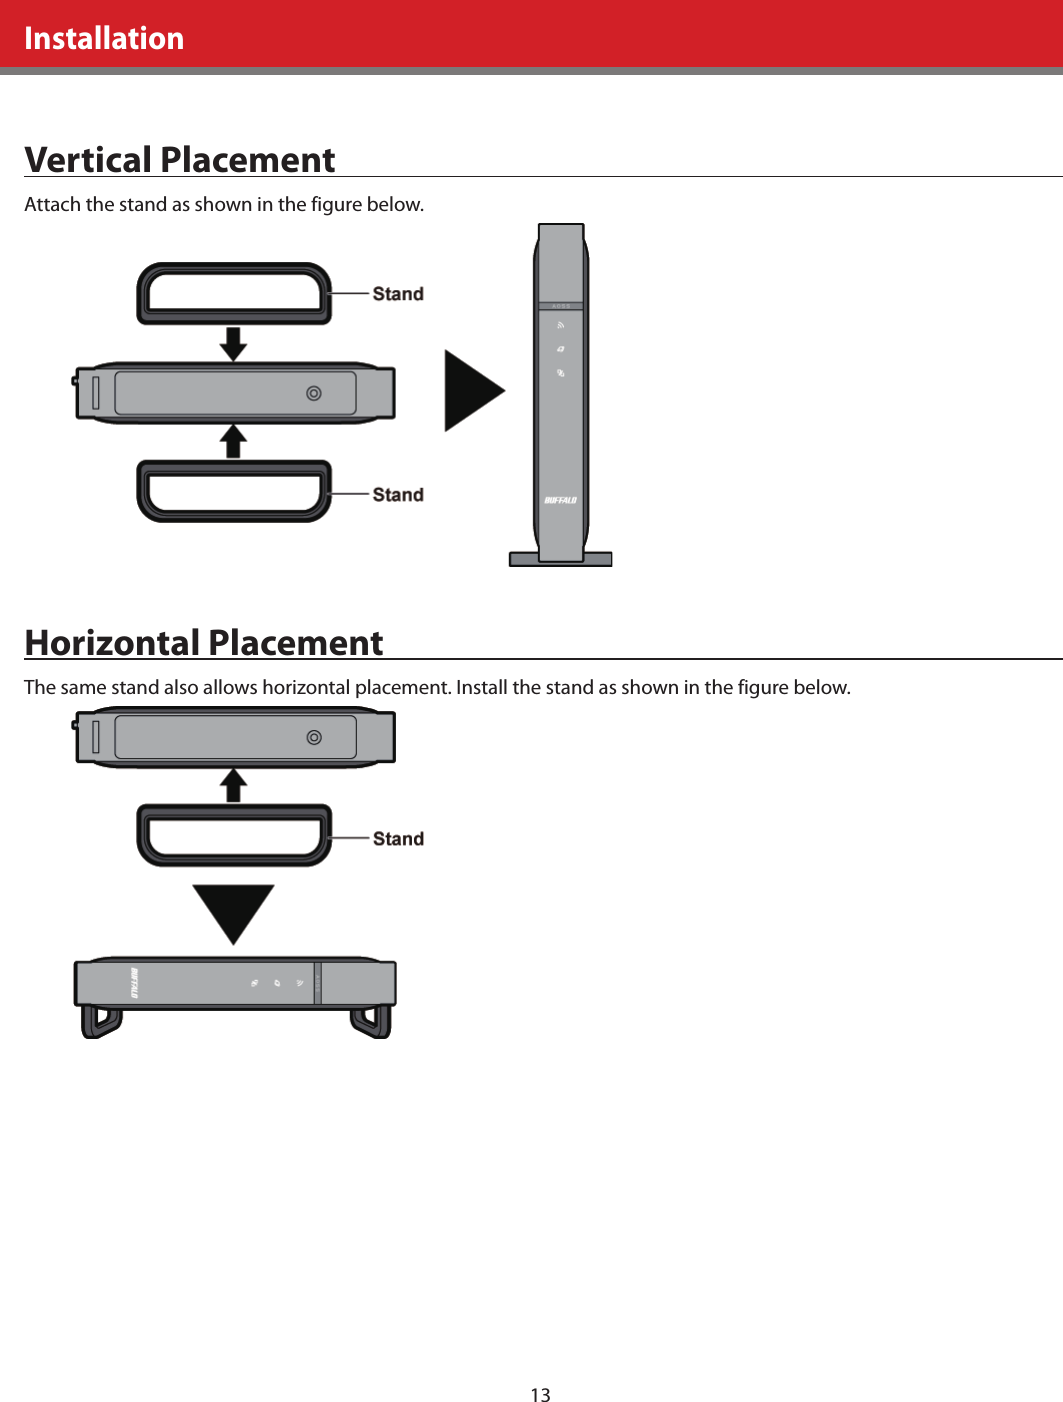 13   Installation  Vertical Placement  Attach the stand as shown in the figure below.    Horizontal Placement  The same stand also allows horizontal placement. Install the stand as shown in the figure below.   